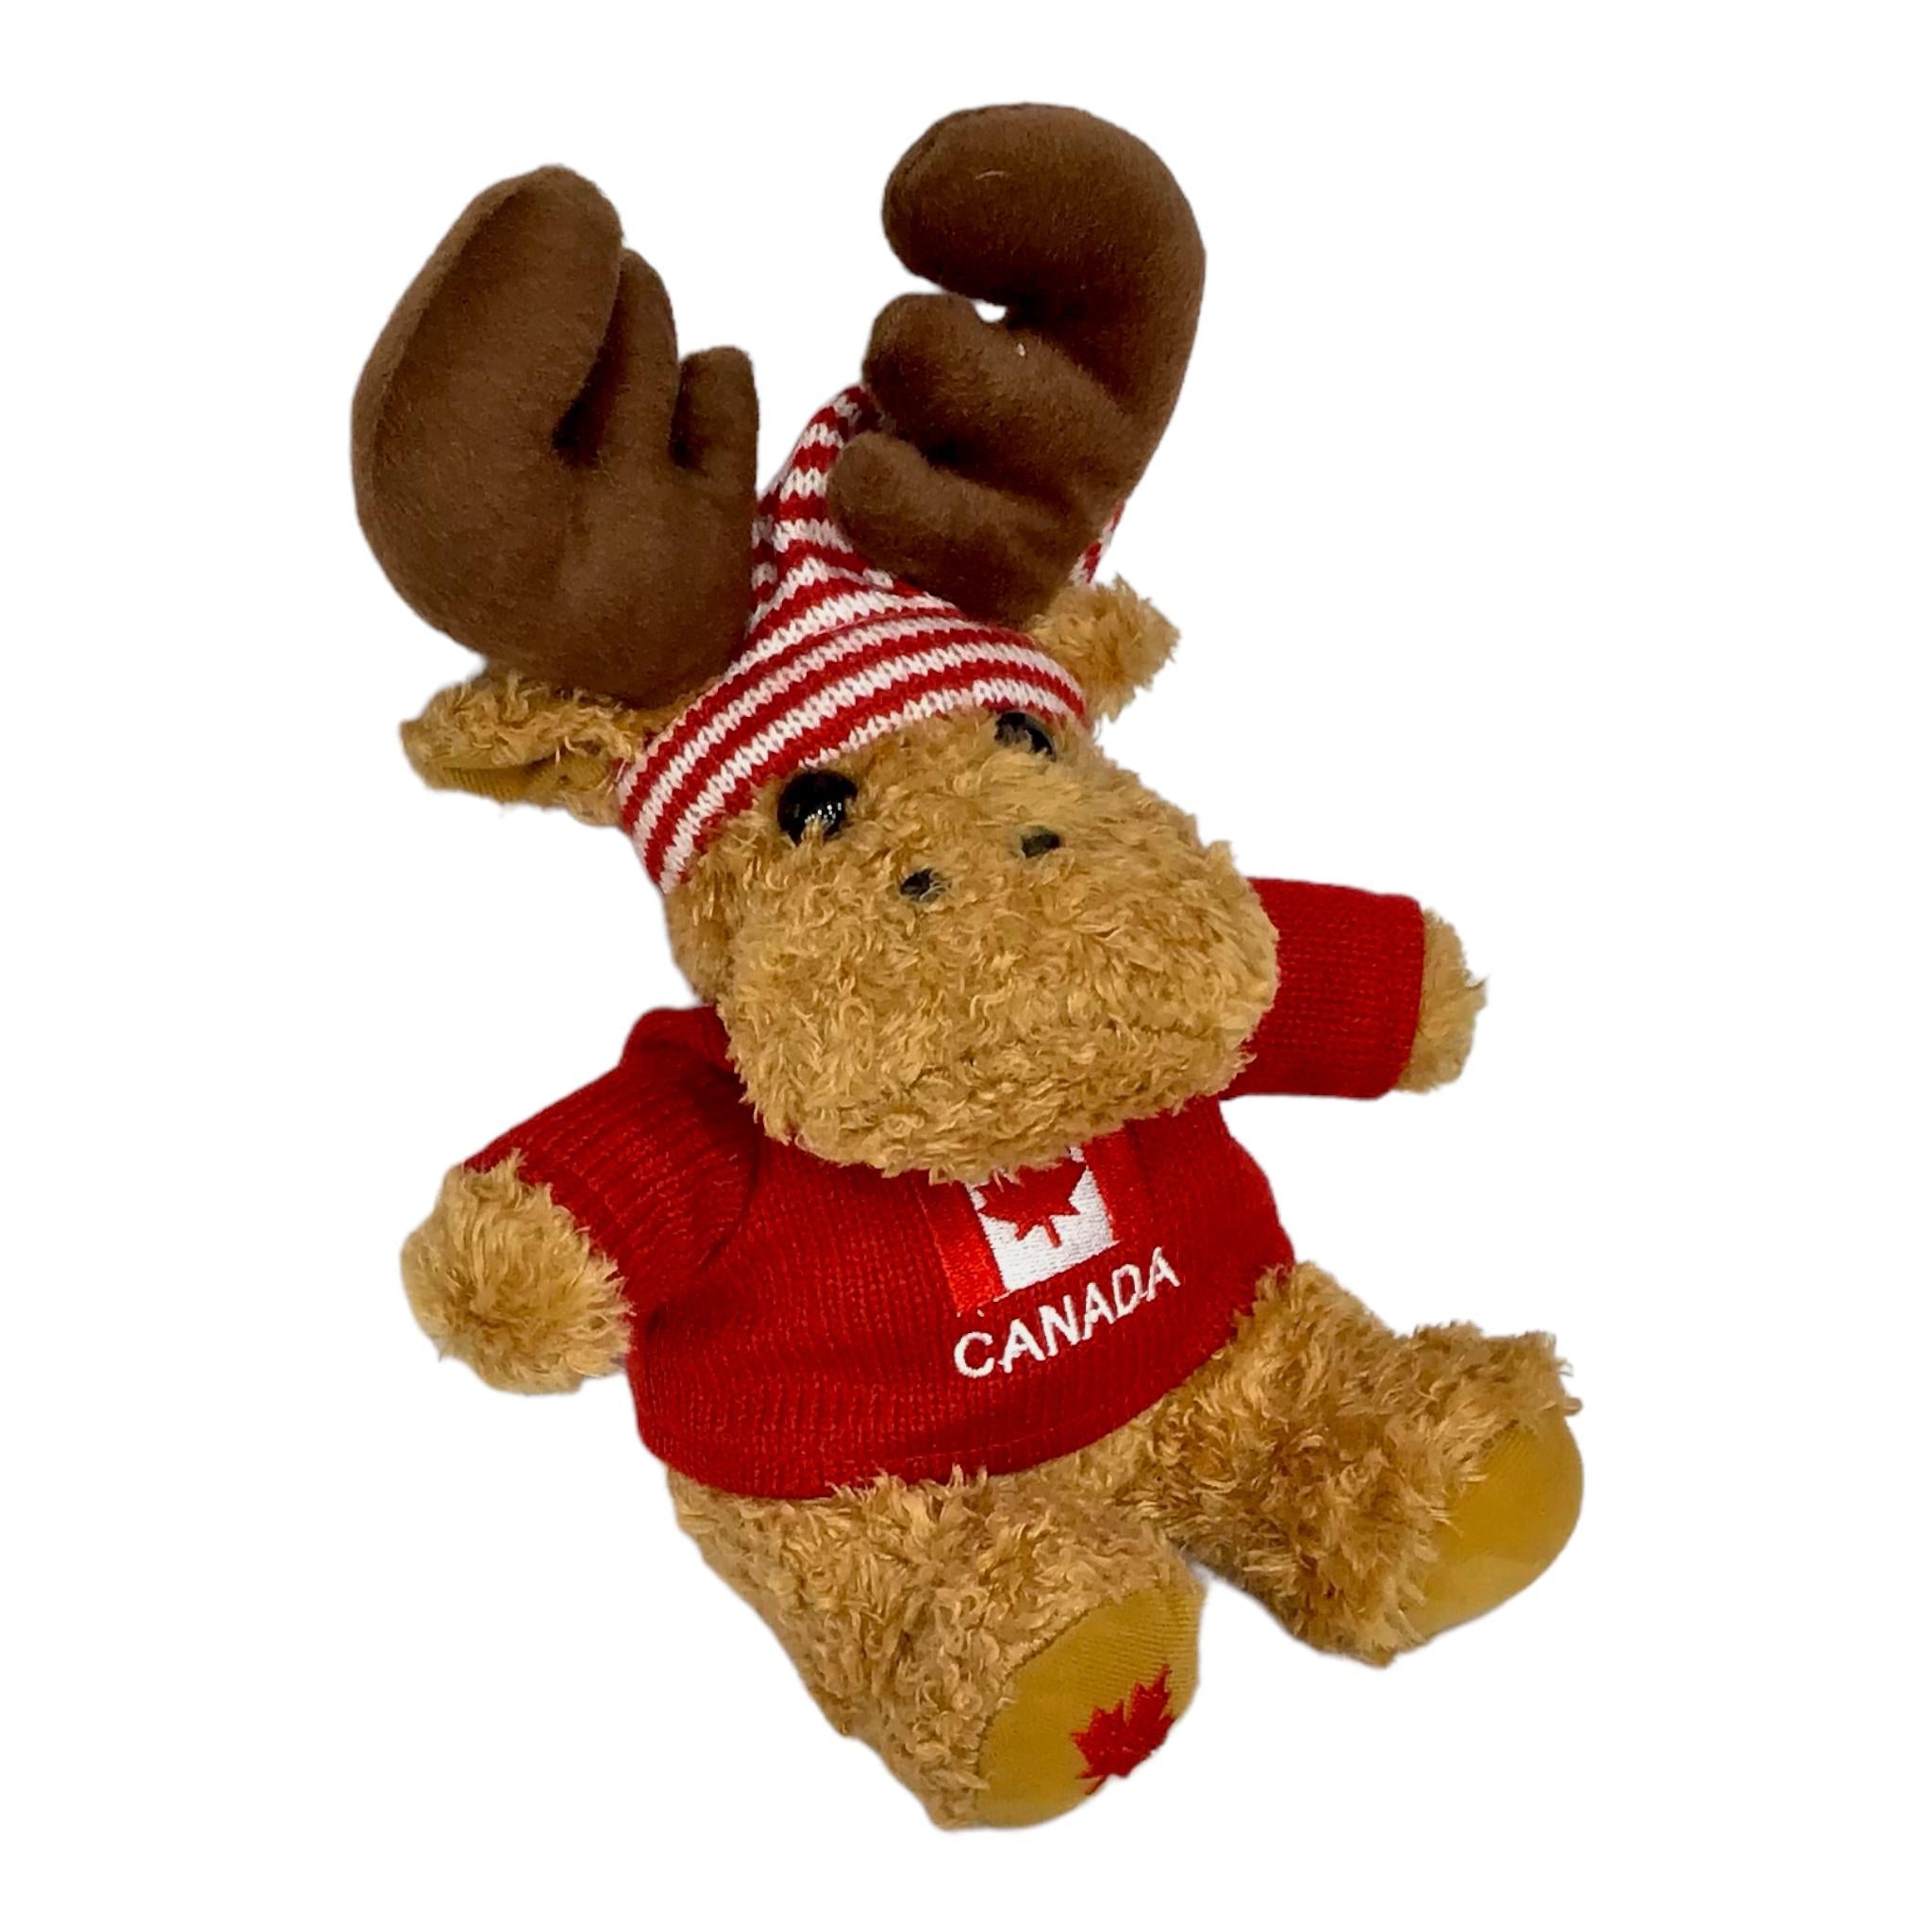 MOOSE STUFFED ANIMAL 9” W/ RED KNITTING SWEATER CANADA FLAG EMBROIDERY & RED / WHITE STRIPED HAT